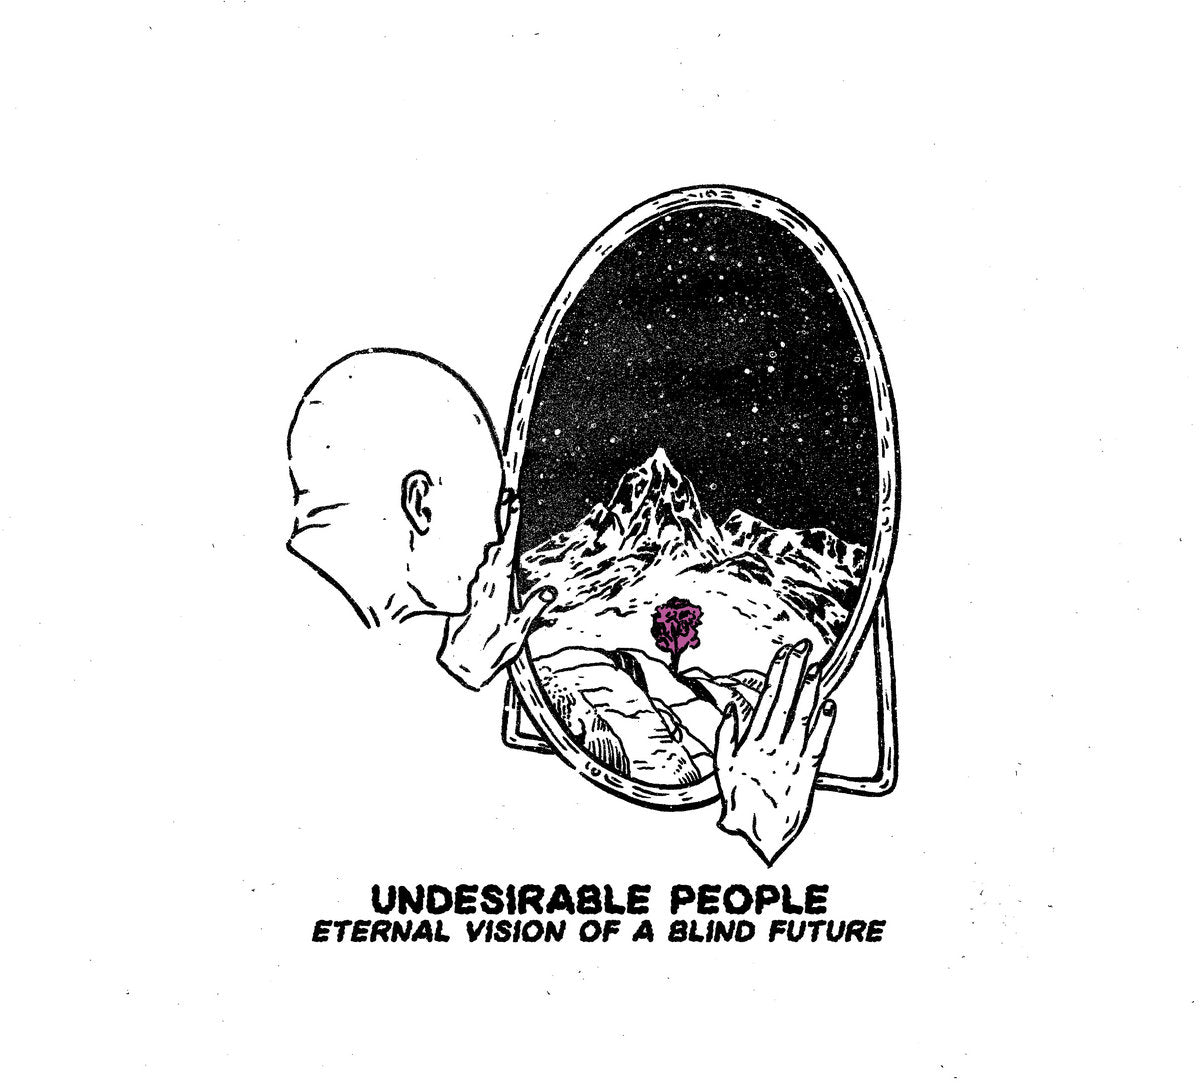 Undesirable People - Eternal Vision of a Blind Future (Vinyl 12")